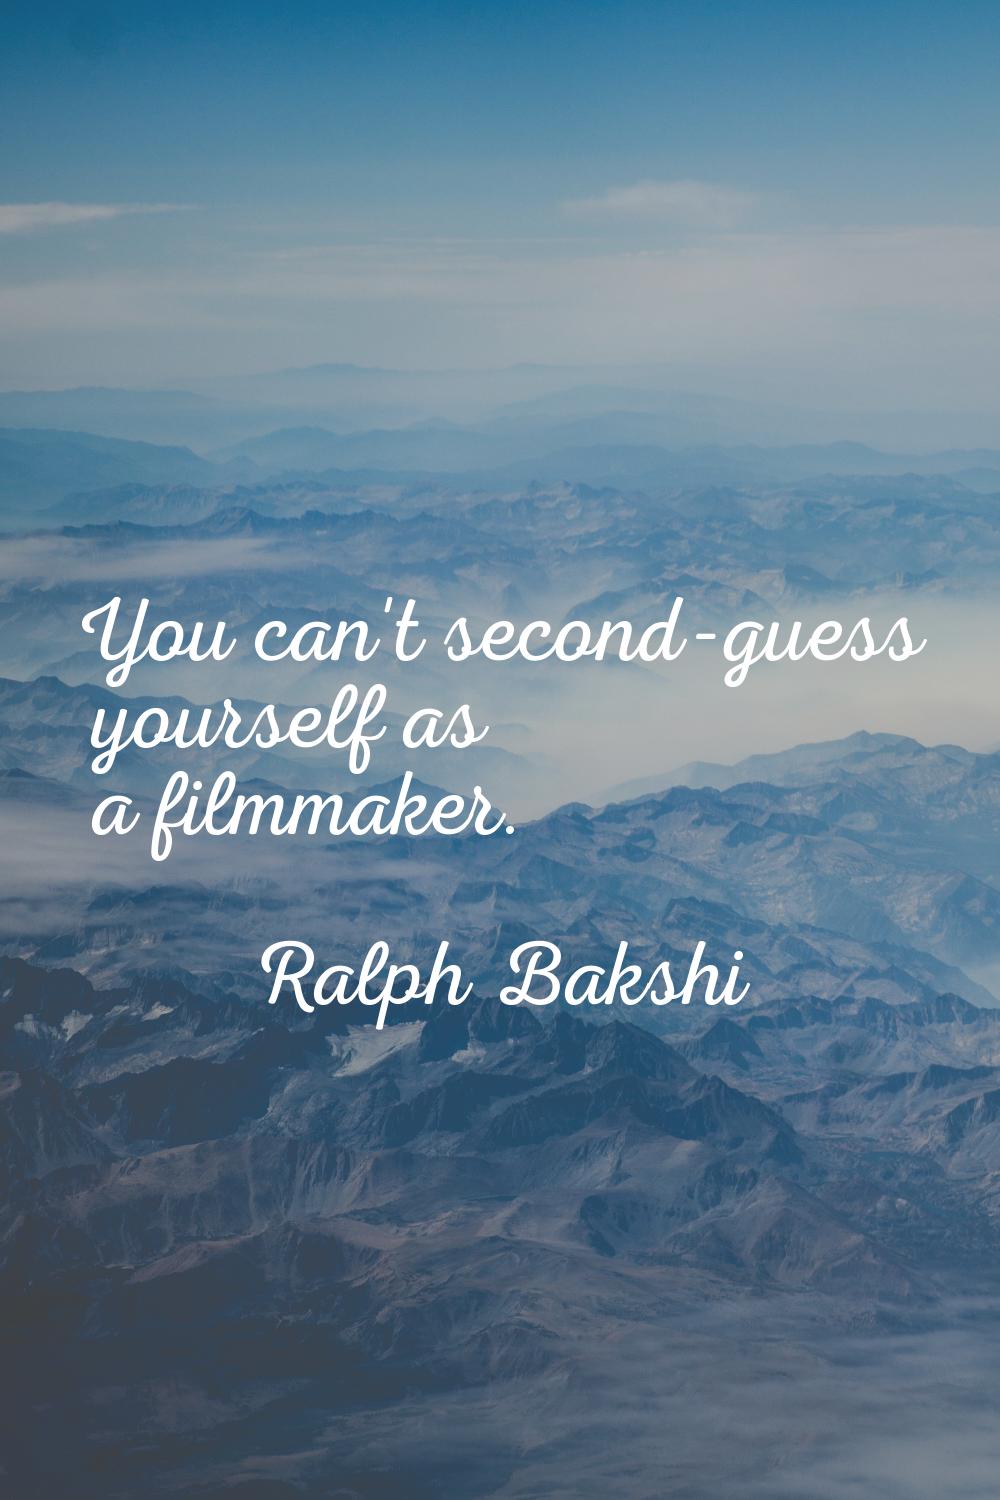 You can't second-guess yourself as a filmmaker.